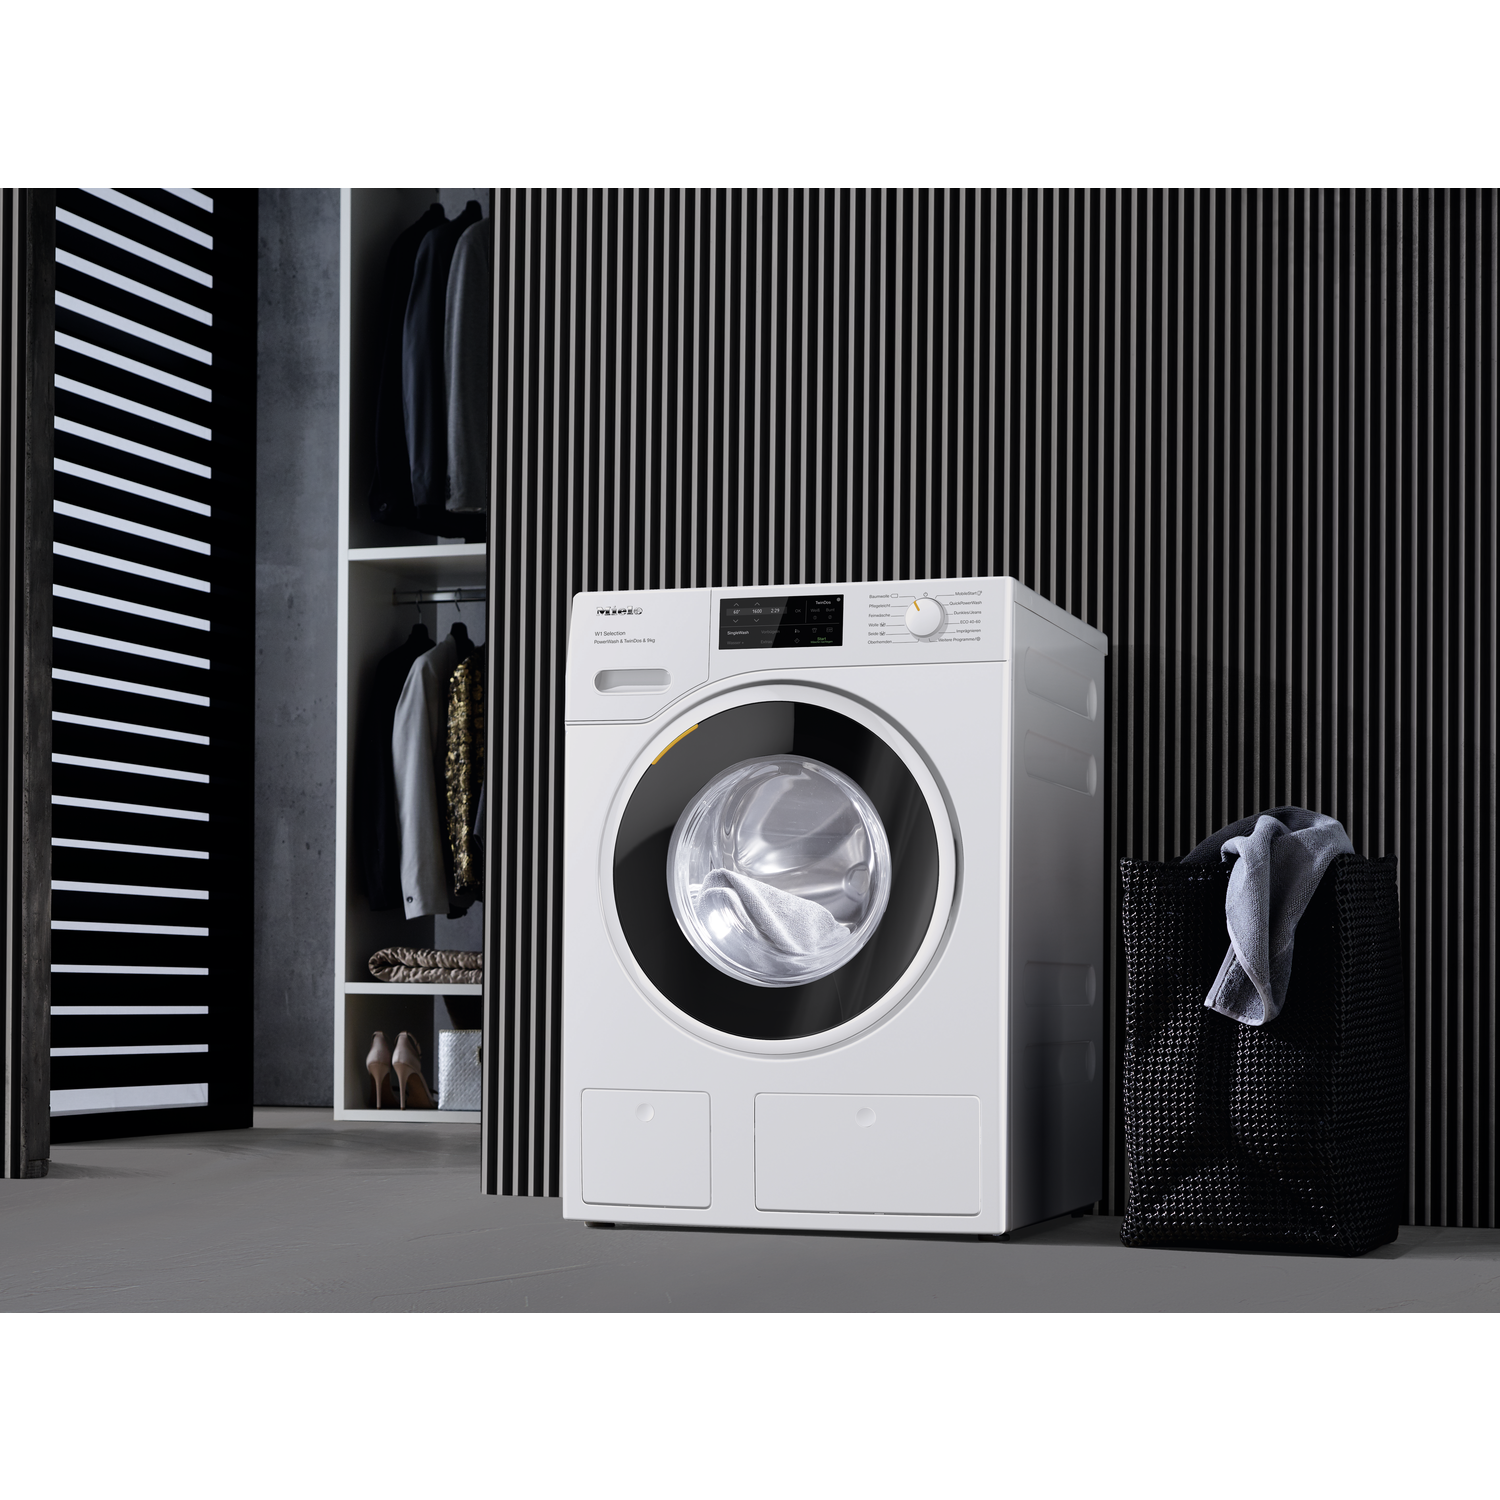 Miele WSI863 Freestanding Washing Machine with TwinDos And Quick Powerwash 1600RPM Spin White 9kg Load 